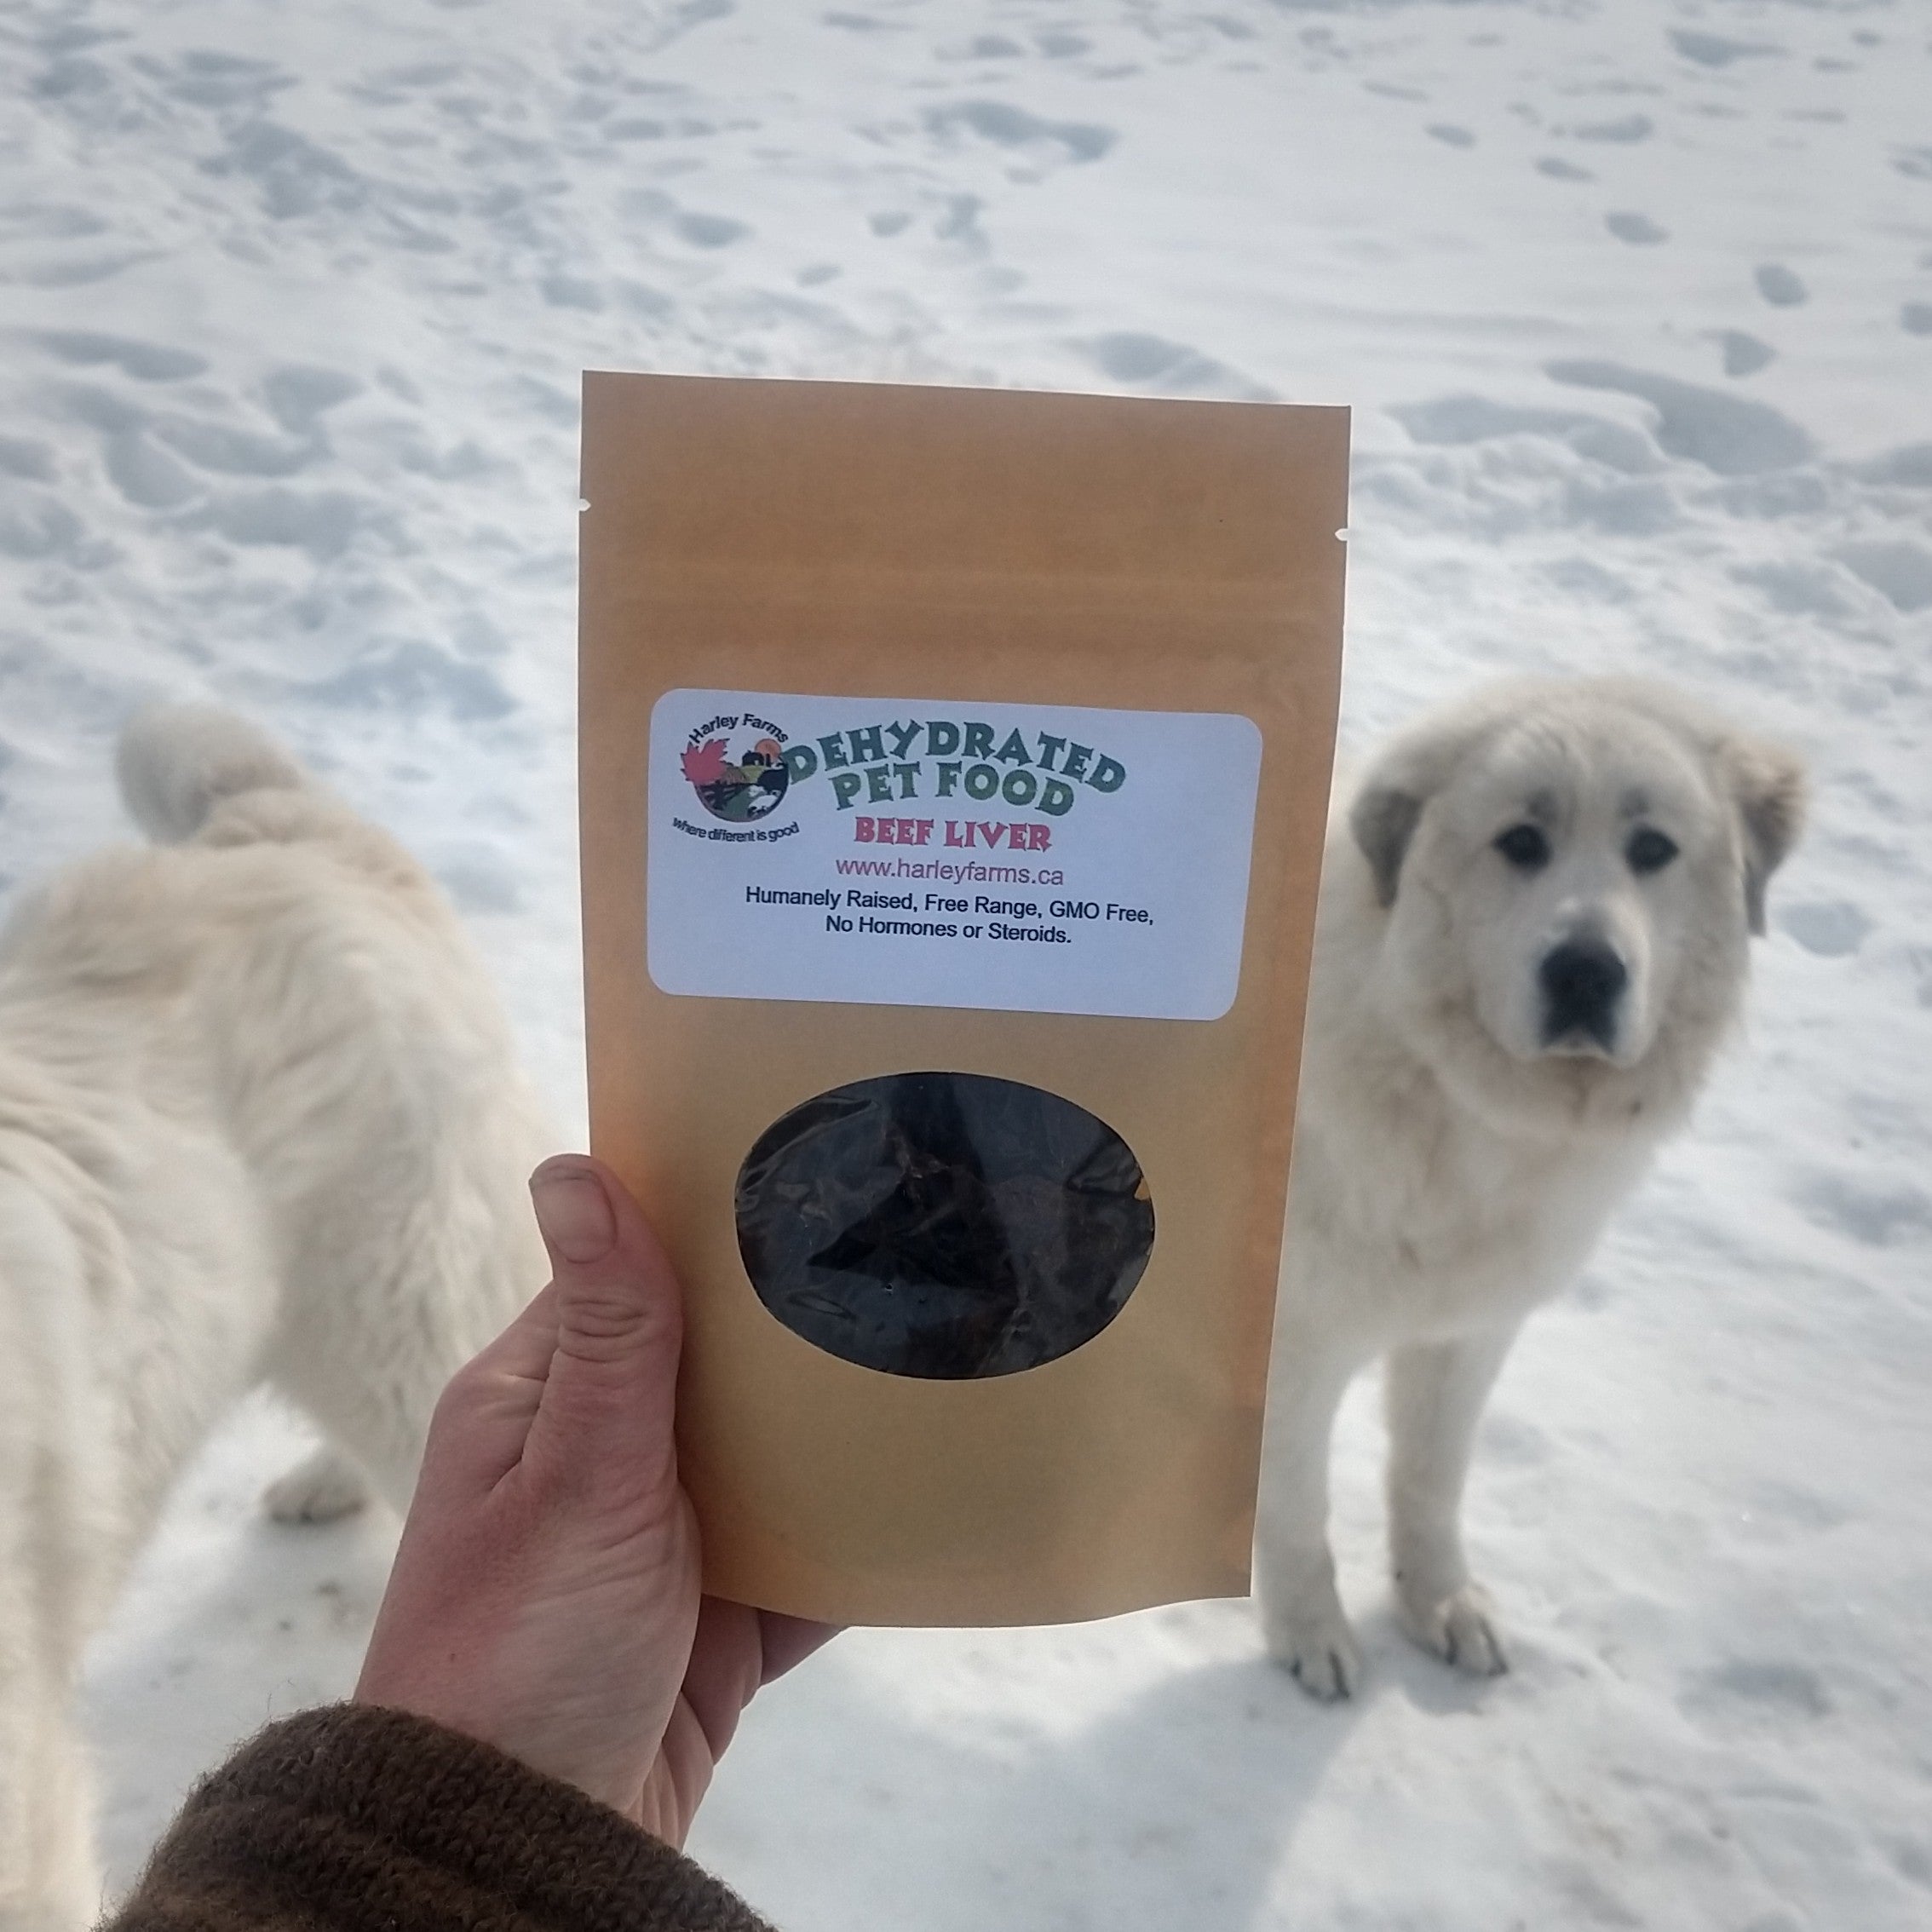 Package of dehydrated beef liver with white dog in the background